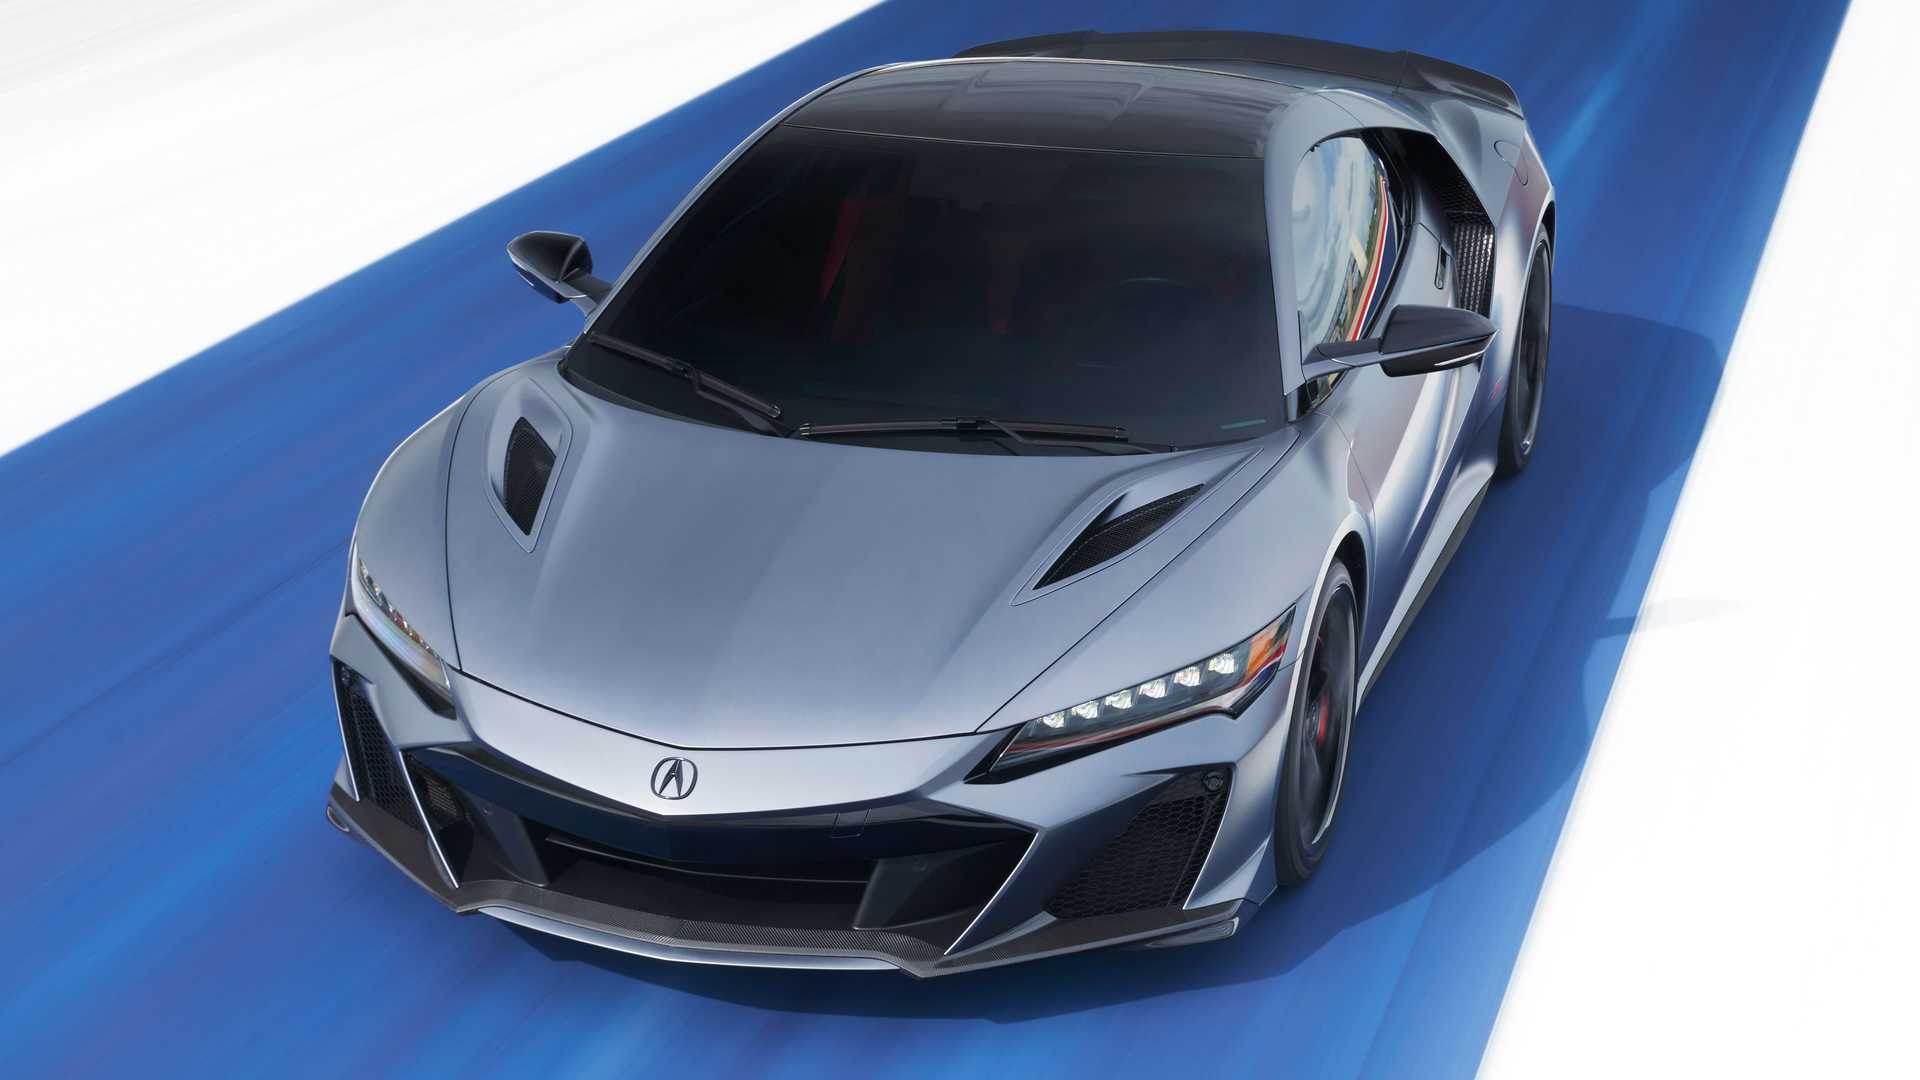 Acura Reiterates The NSX Will Likely Return As An Electric Supercar